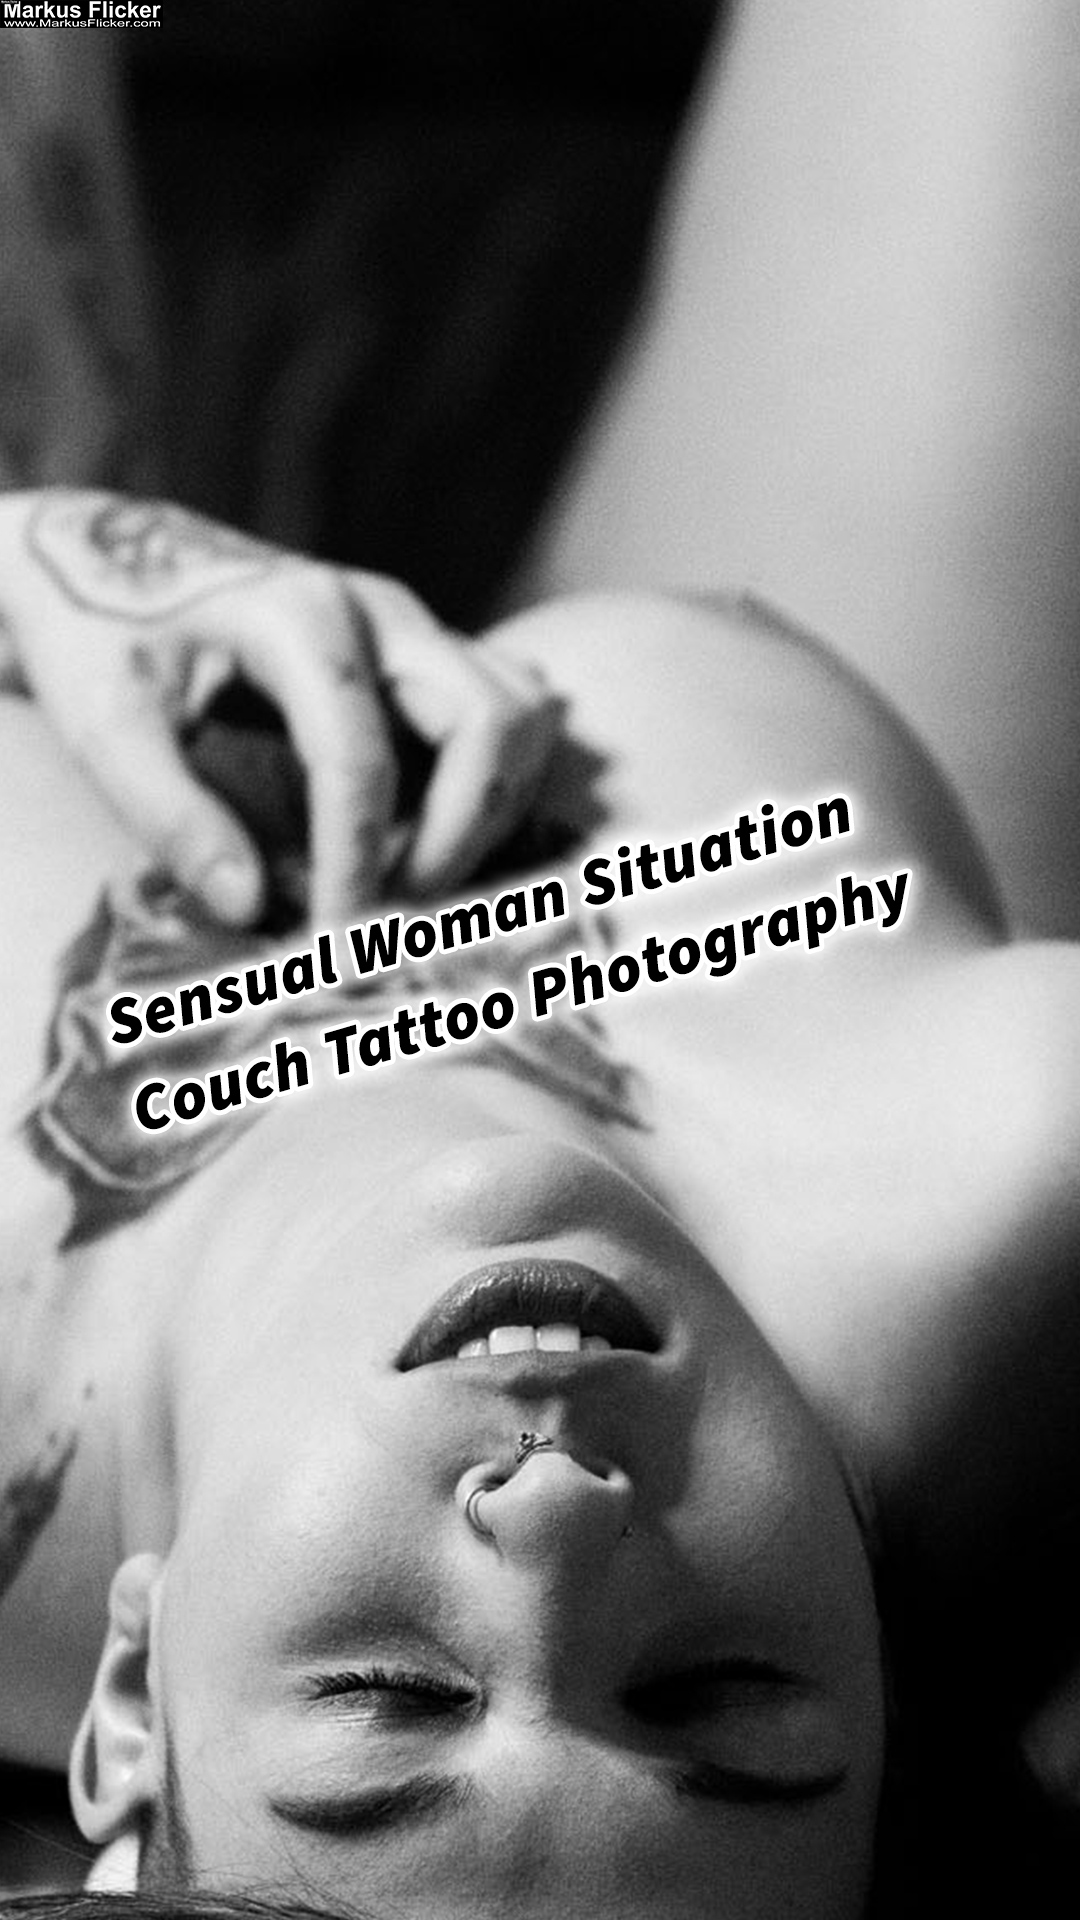 Sensual Woman Situation Couch Tattoo Photography Female Model Lisa